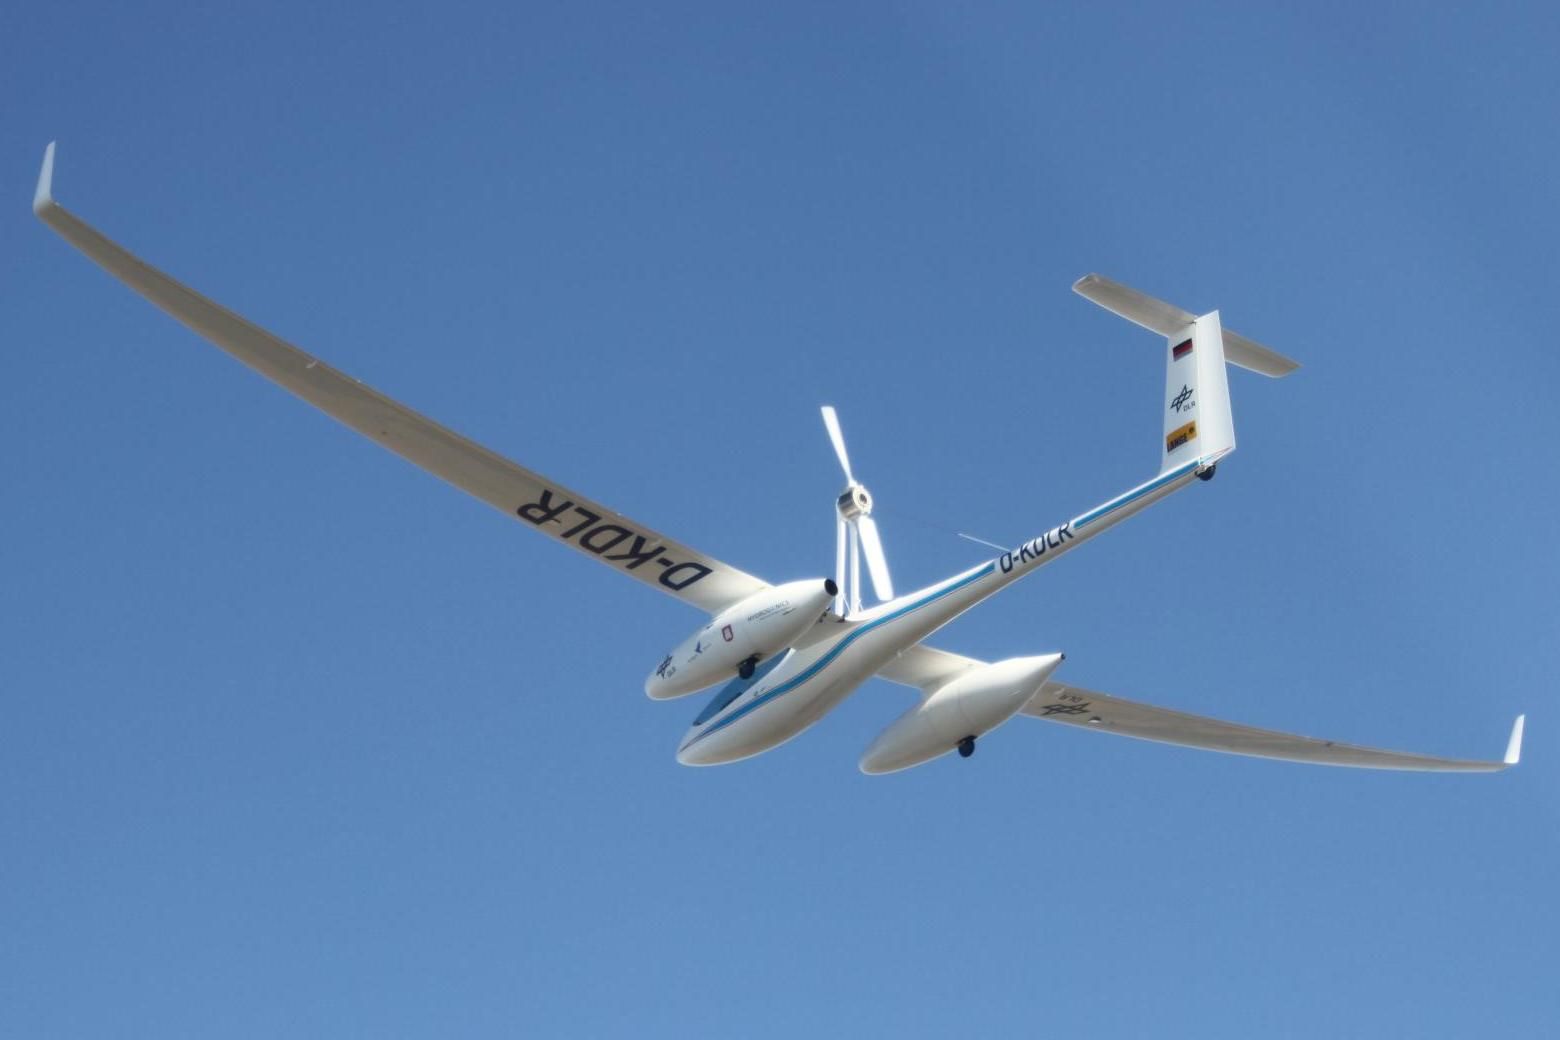 The Antares DLR-H2 research aircraft, powered by a hydrogen fuel cell, flying in the sky.